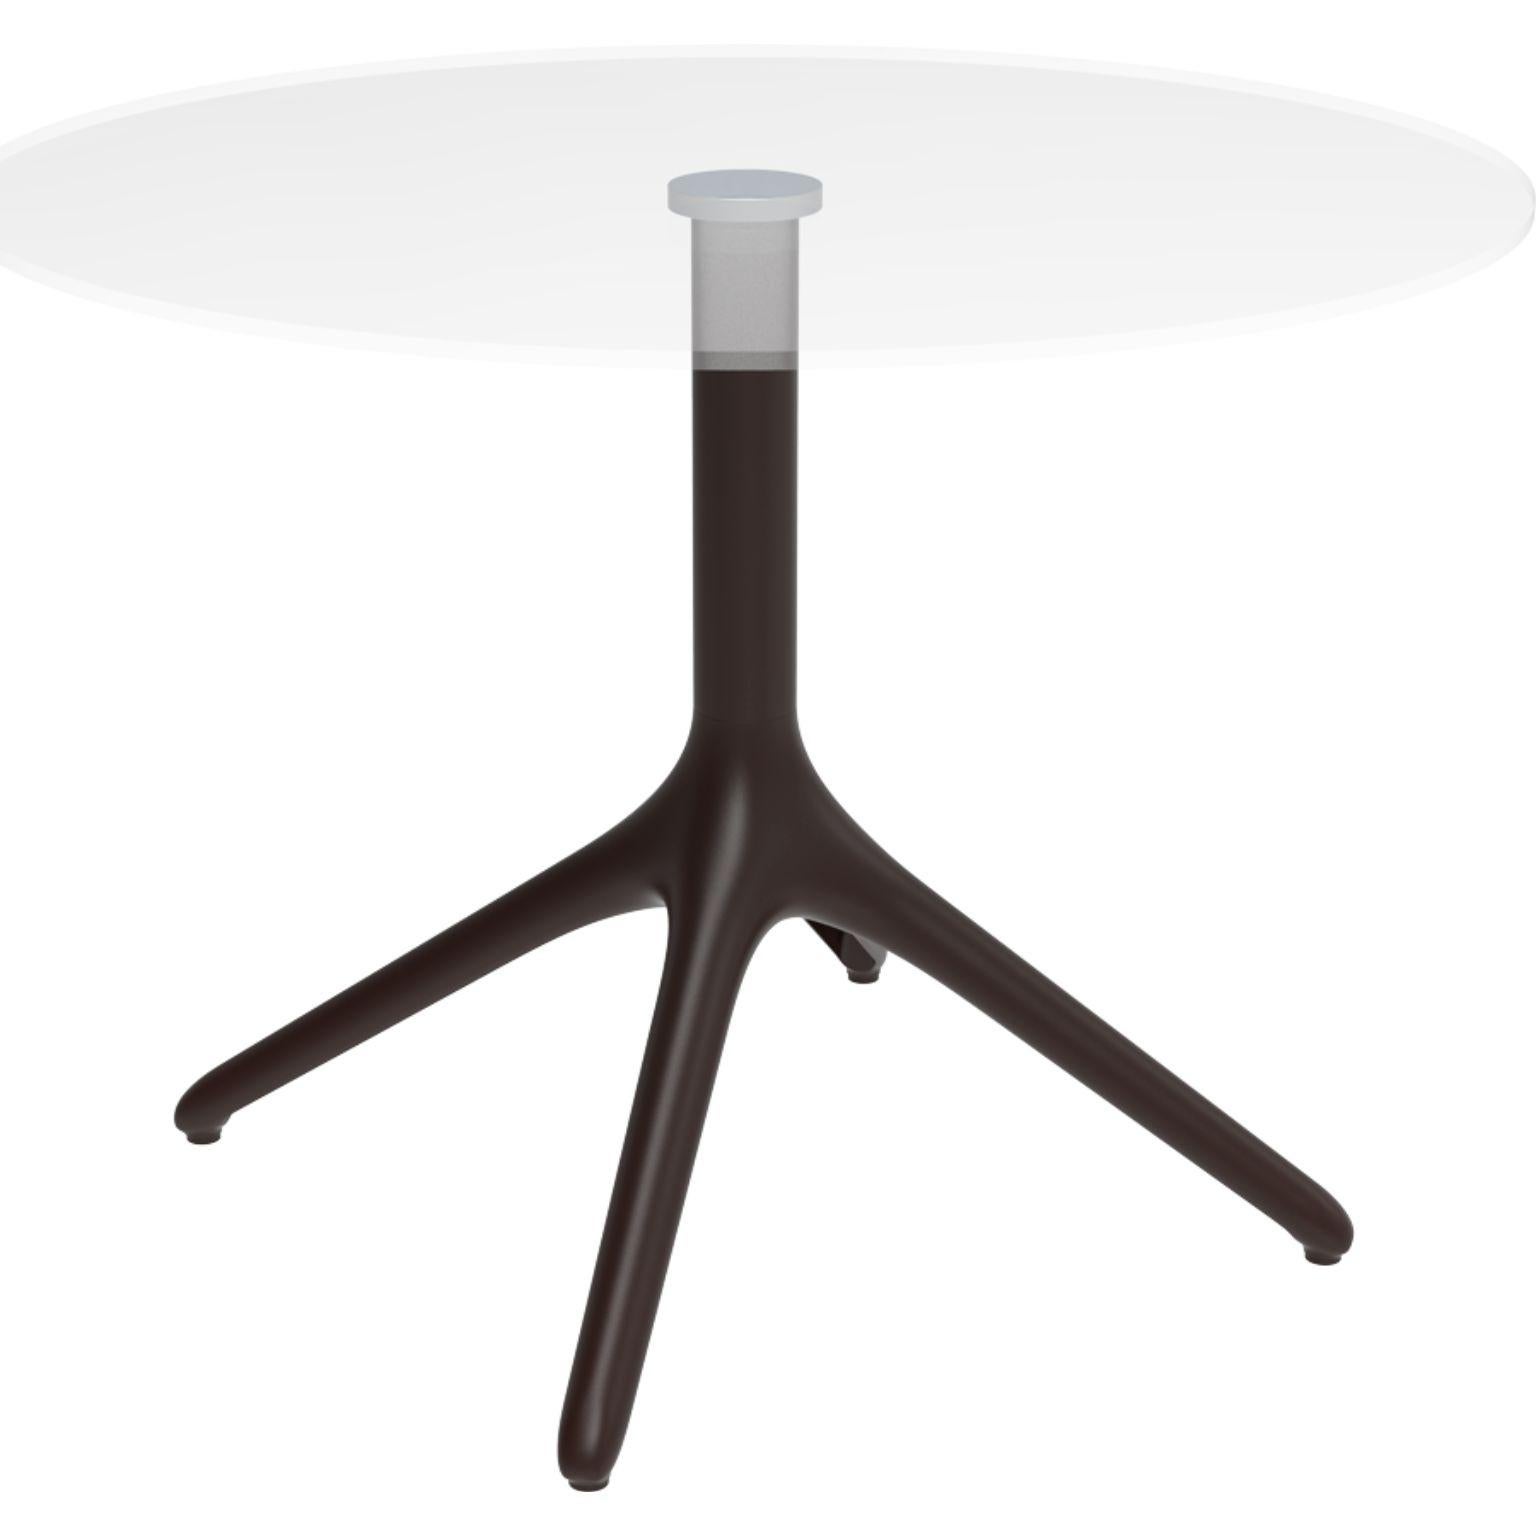 Uni chocolate table XL 73 by MOWEE
Dimensions: D 50 x H 73 cm
Material: Aluminium, tempered glass
Weight: 9 kg
Also available in different colours and finishes.

A table designed to be as versatile as possible and can coexist with a variety of